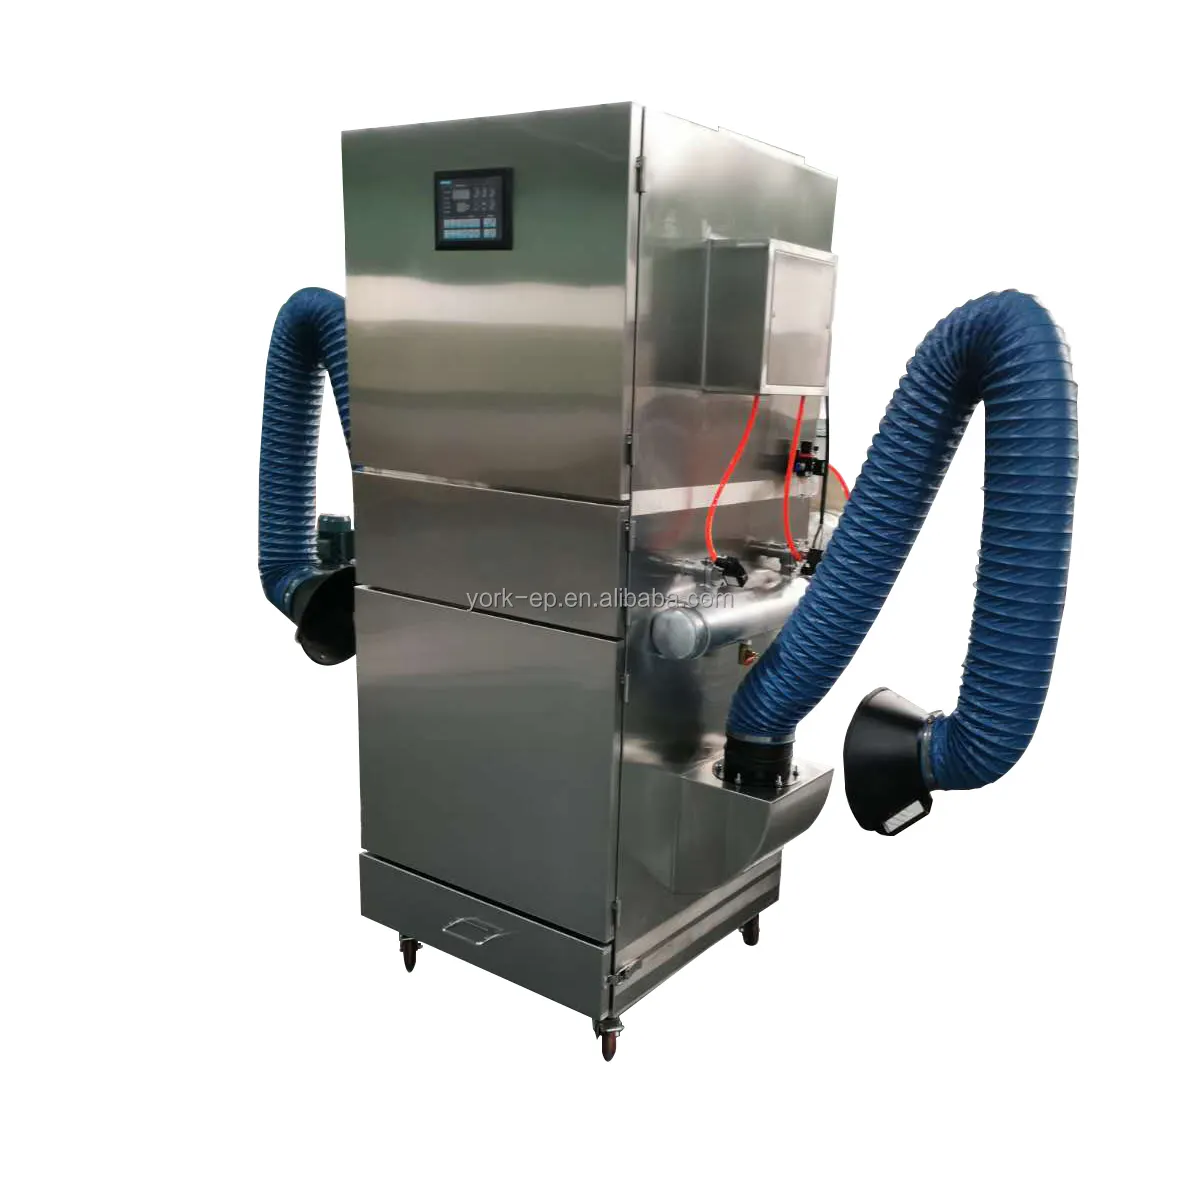 Portable Stainless Steel Filter Cartridge Dust Collector for Food Industry